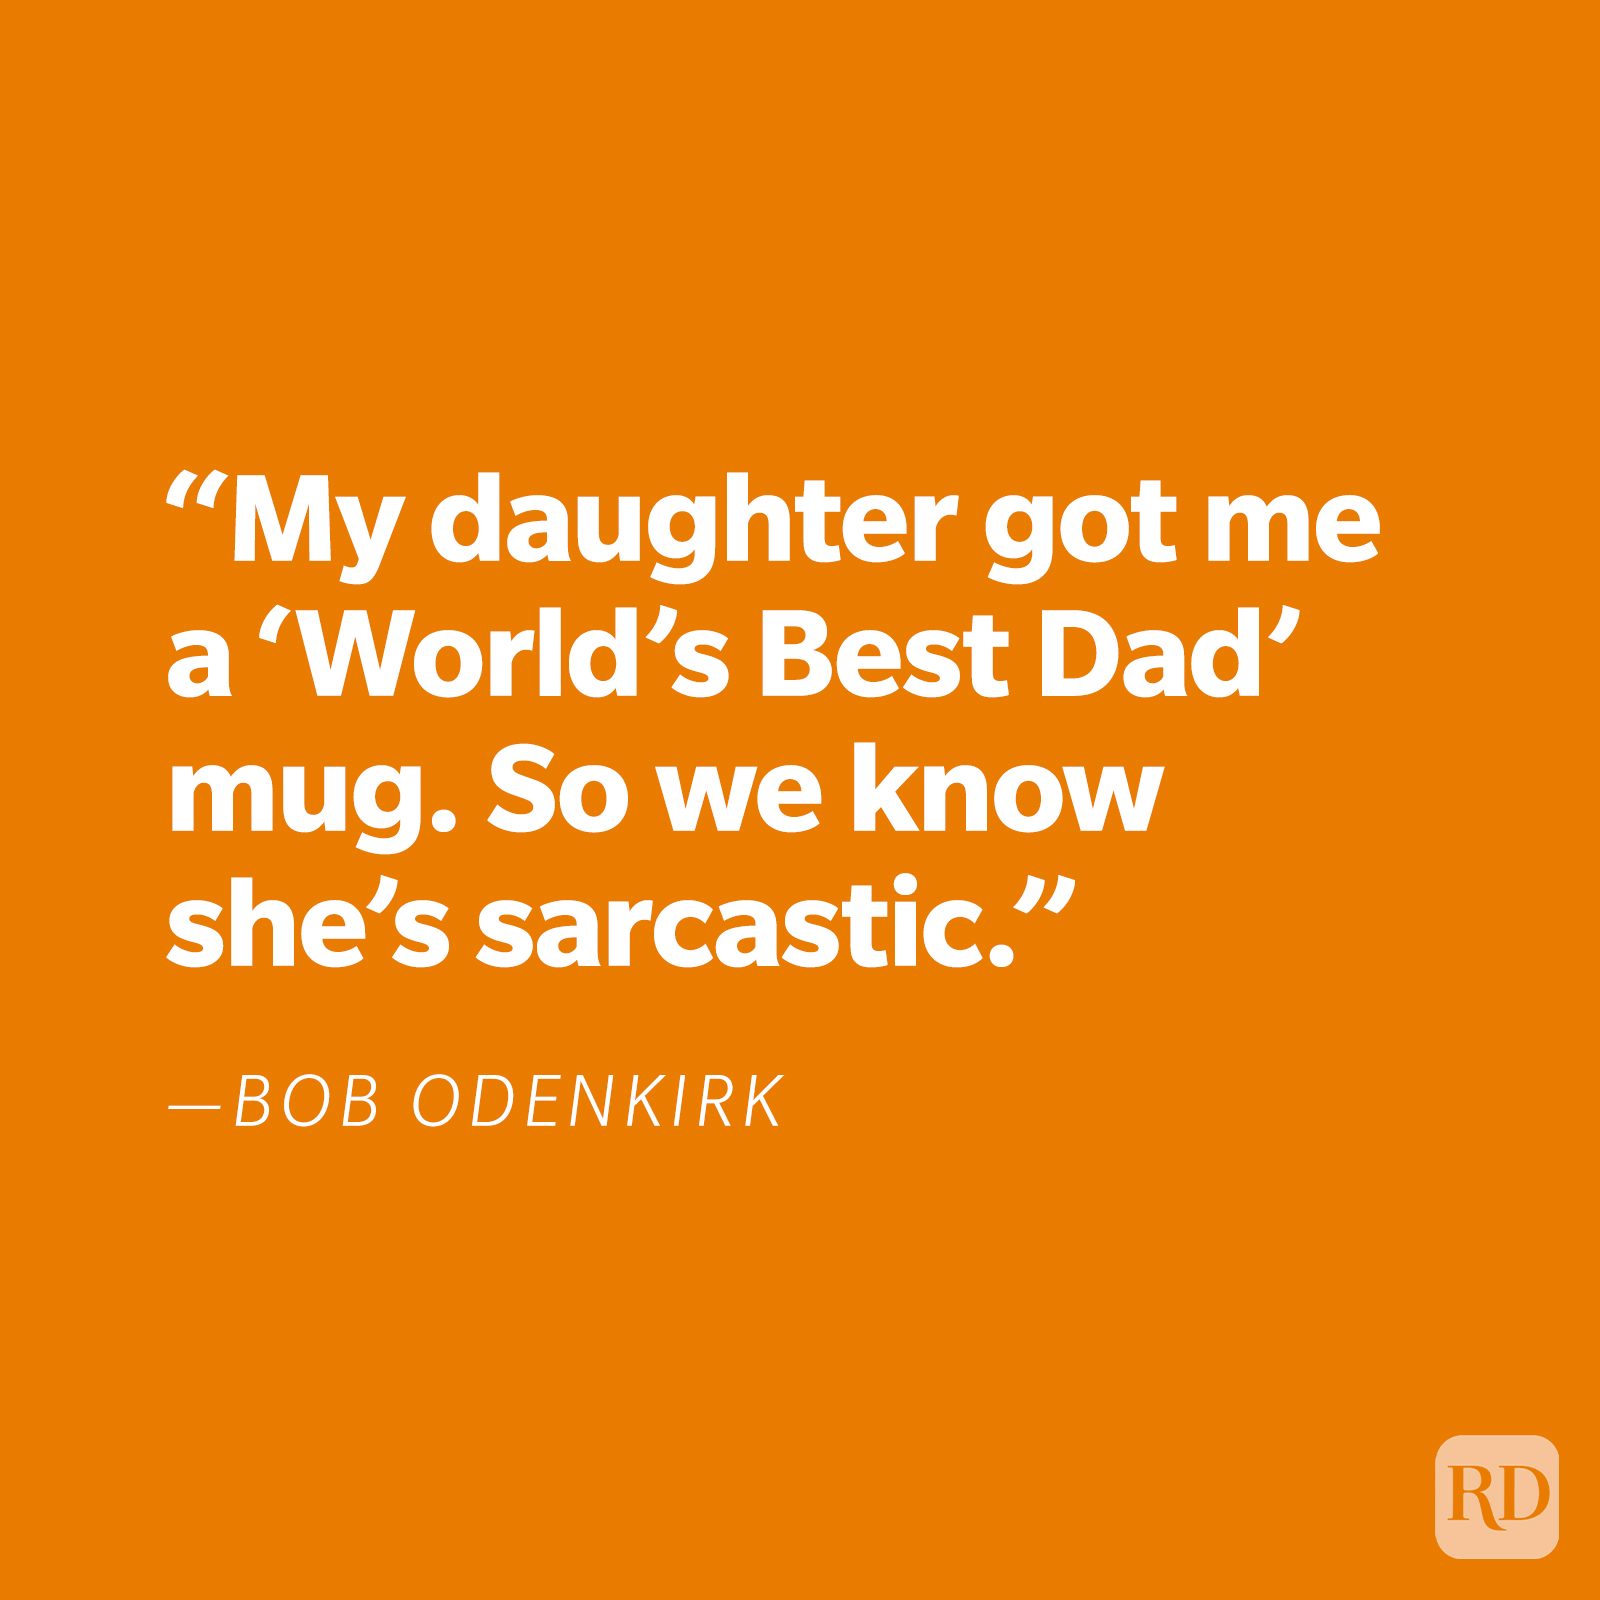 "My daughter got me a 'World's Best Dad' mug. So we know she's sarcastic." —Bob Odenkirk